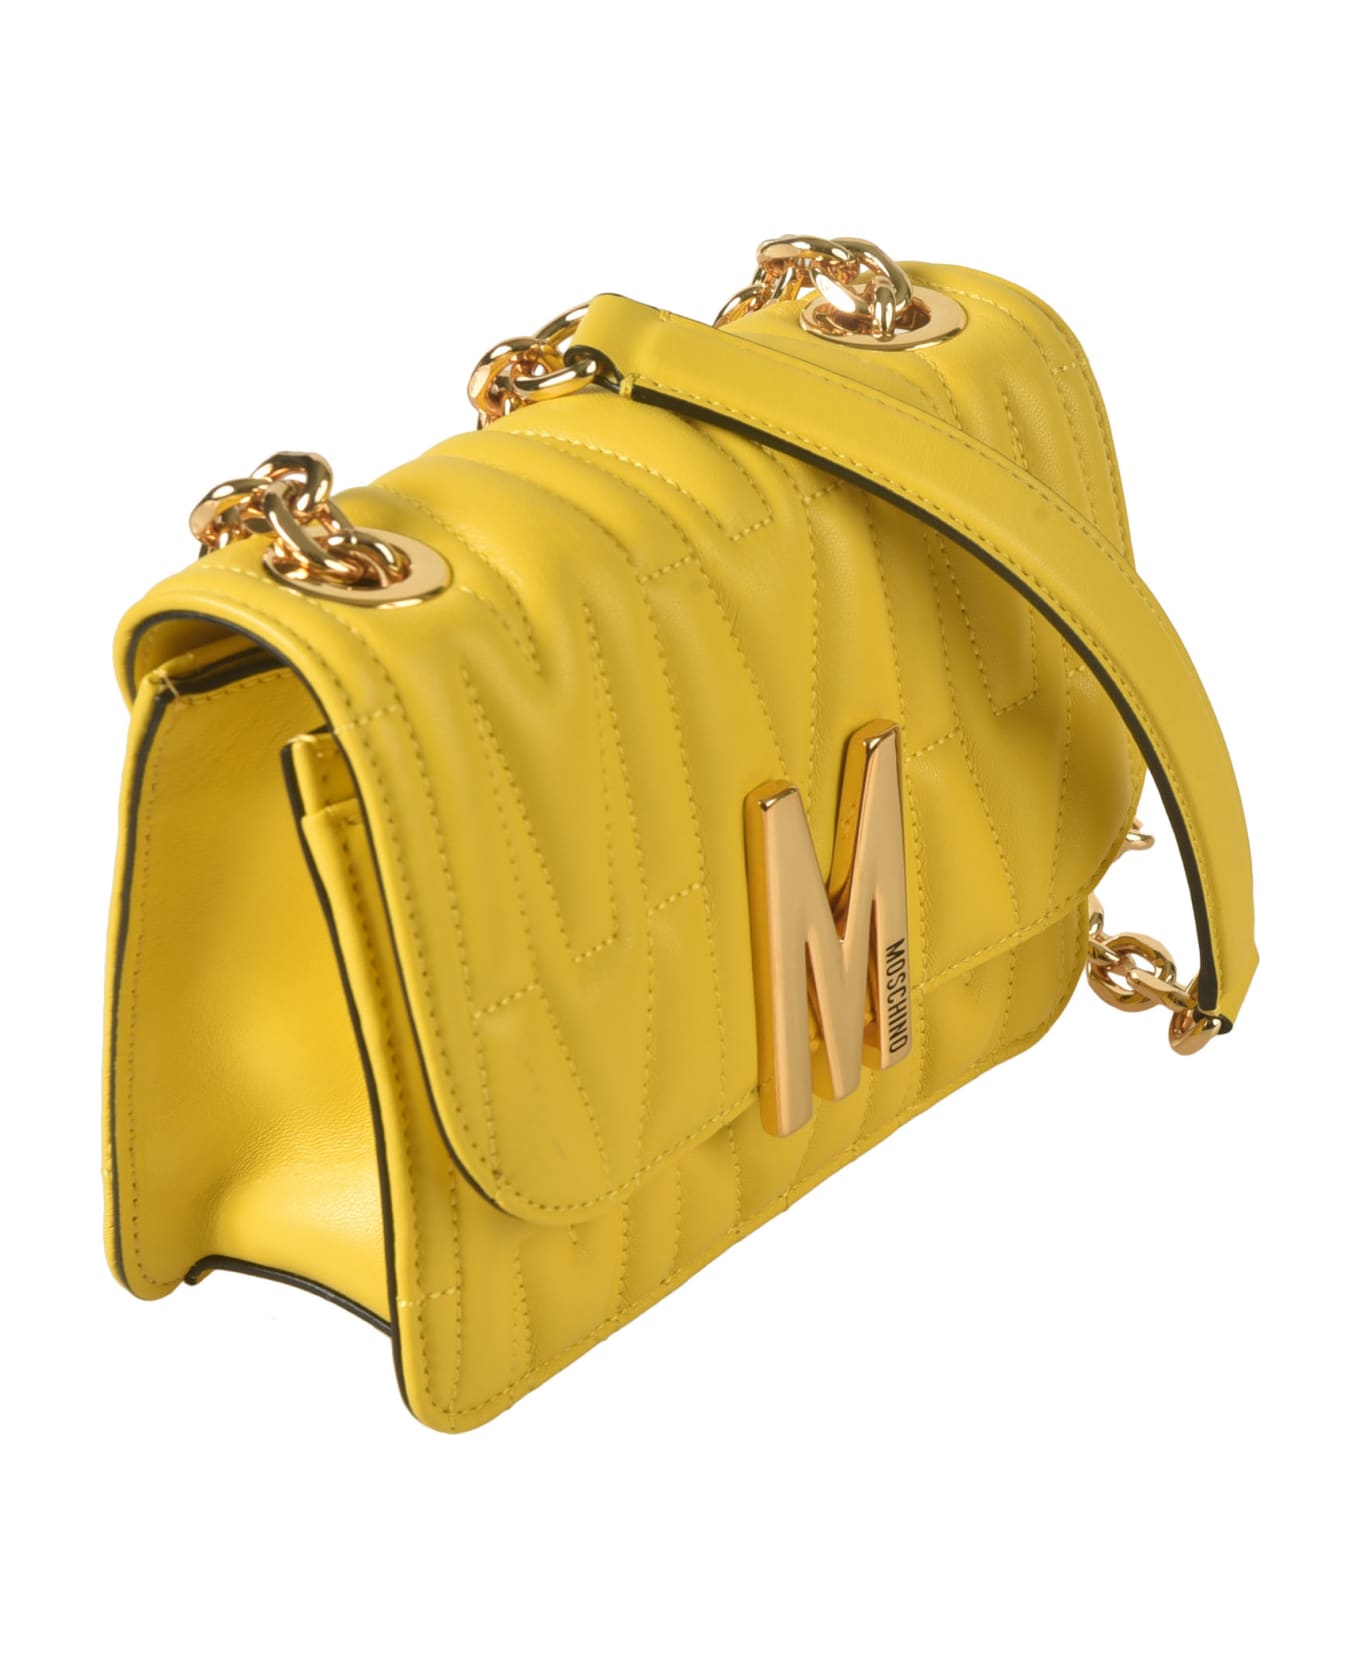 Moschino Quilted Chain Shoulder Bag - 0027